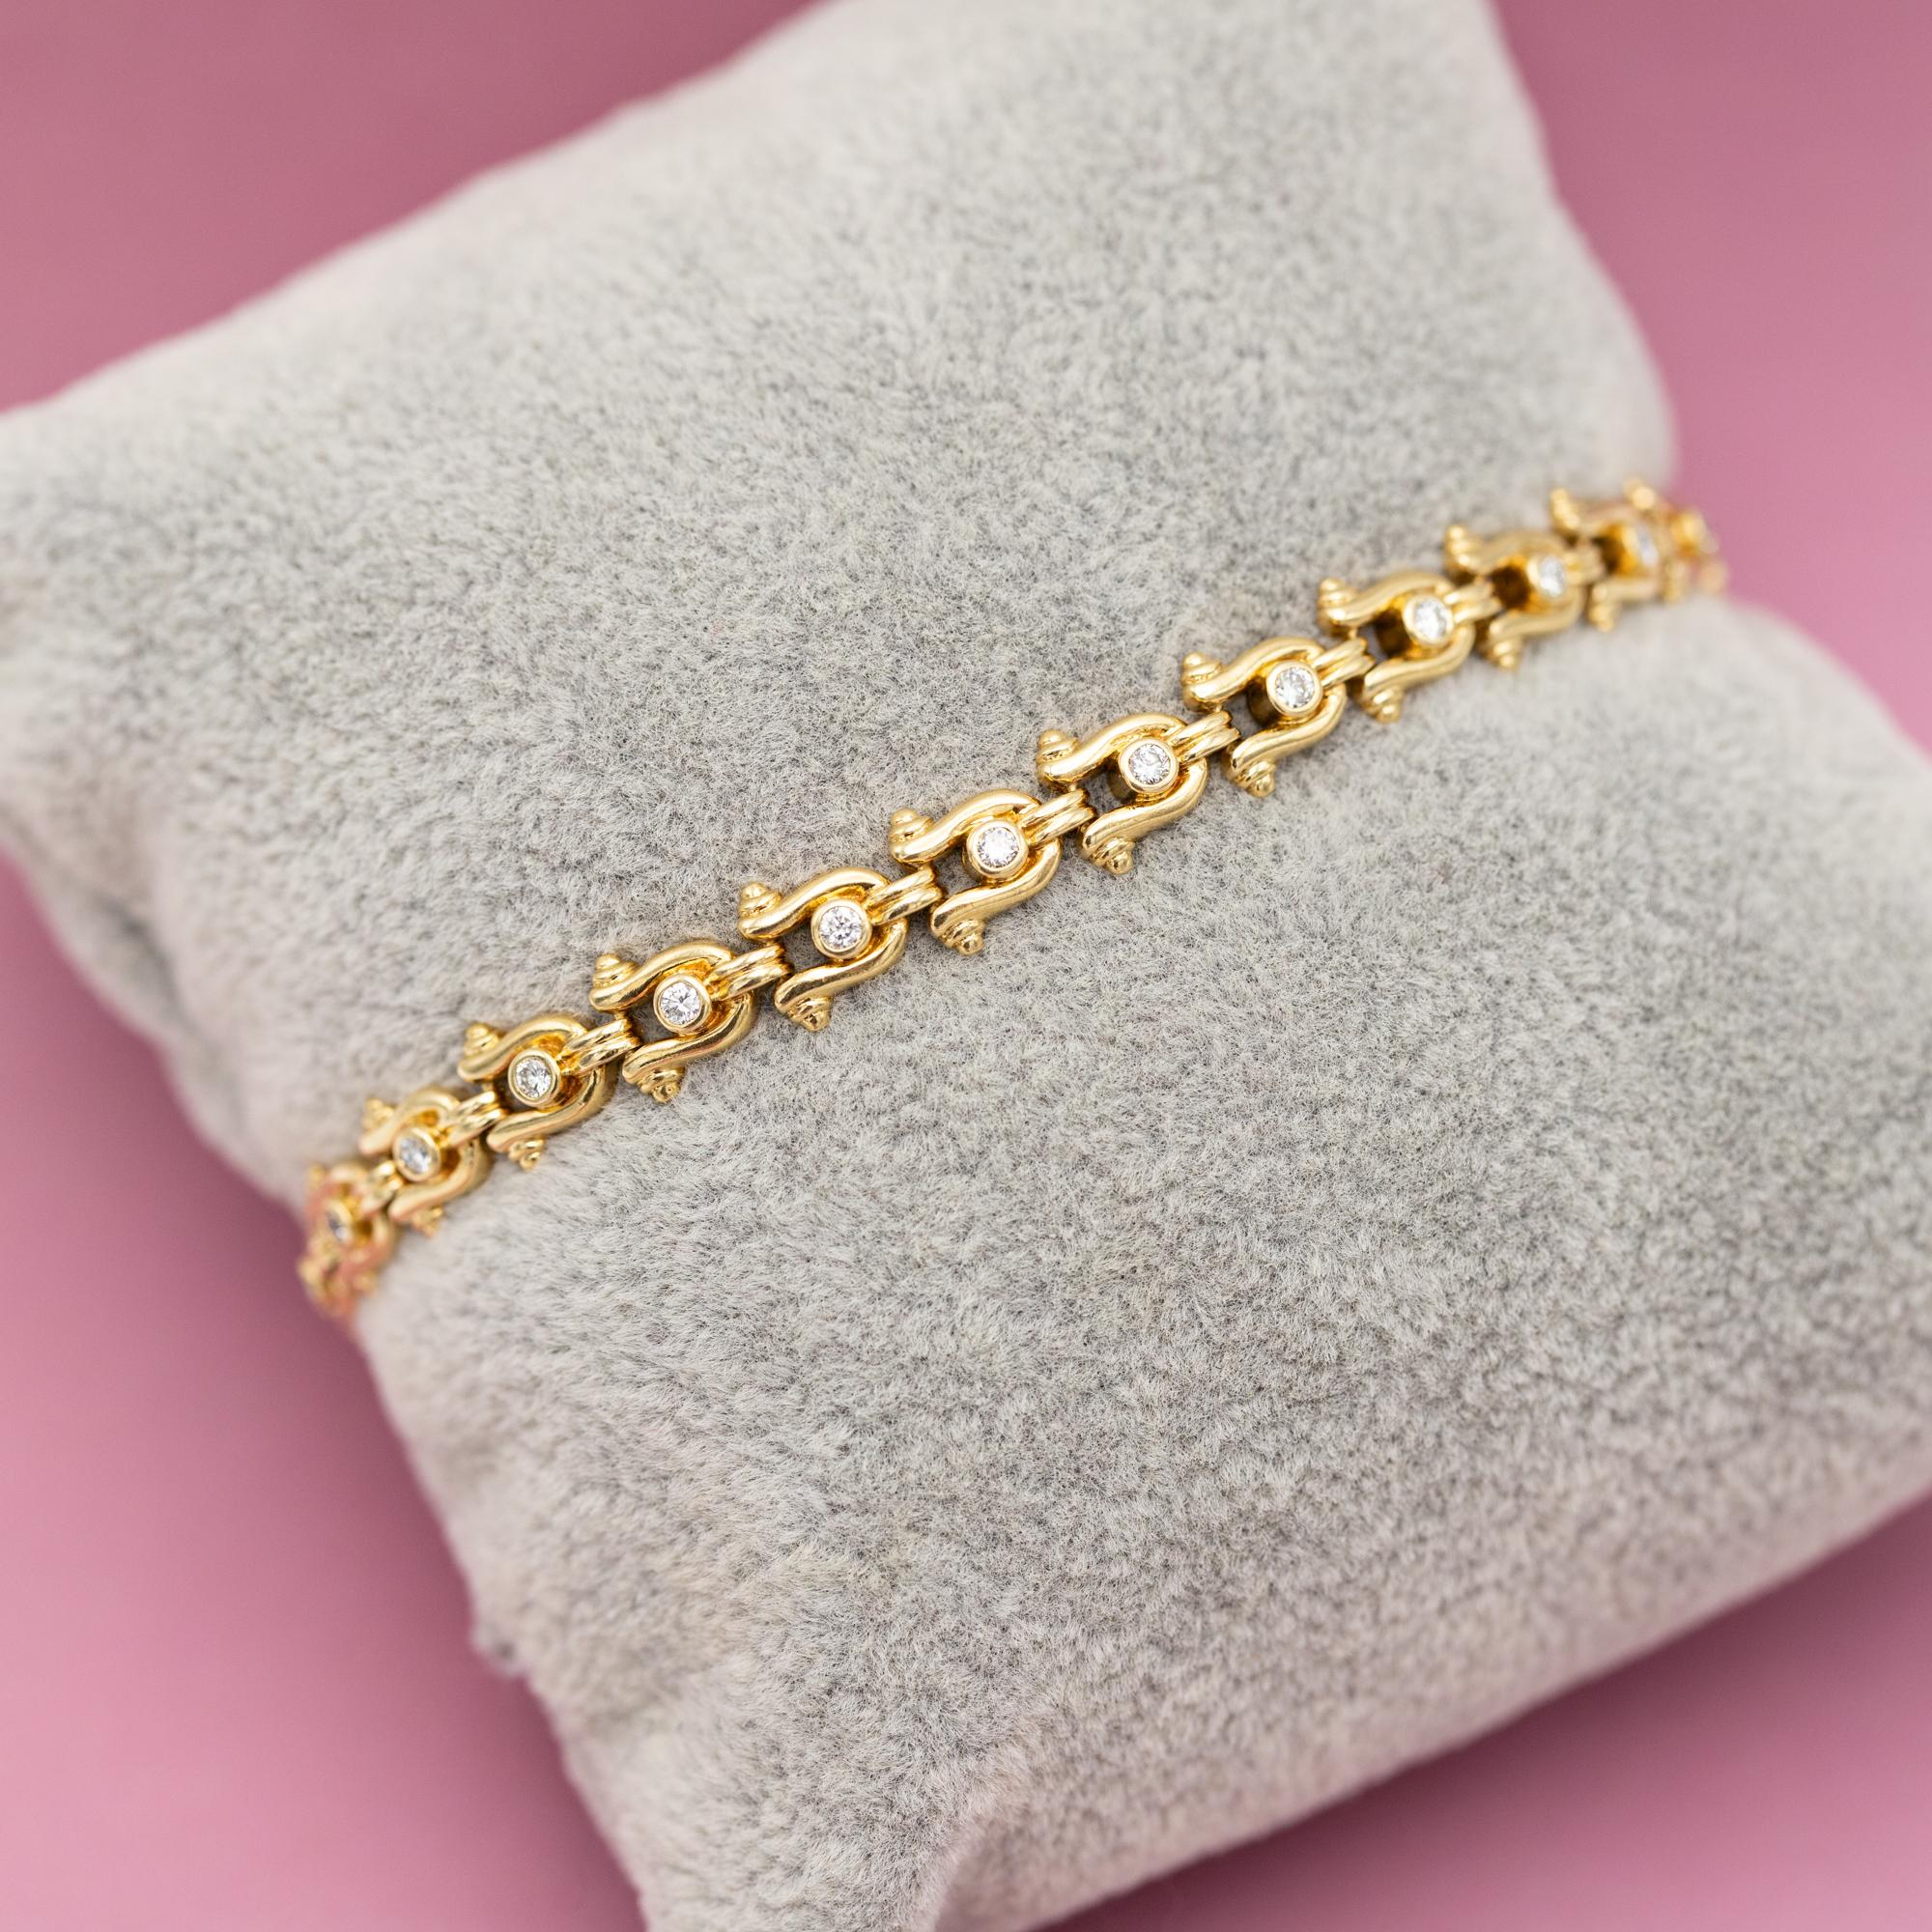 For sale is this royal and elegant vintage tennis bracelet. This bracelet is crafted in 18k yellow gold with and is hallmarked with a 750 mark. Twenty-five brilliant cut diamonds ensure its elegant look and royal appearance. They combine for a total